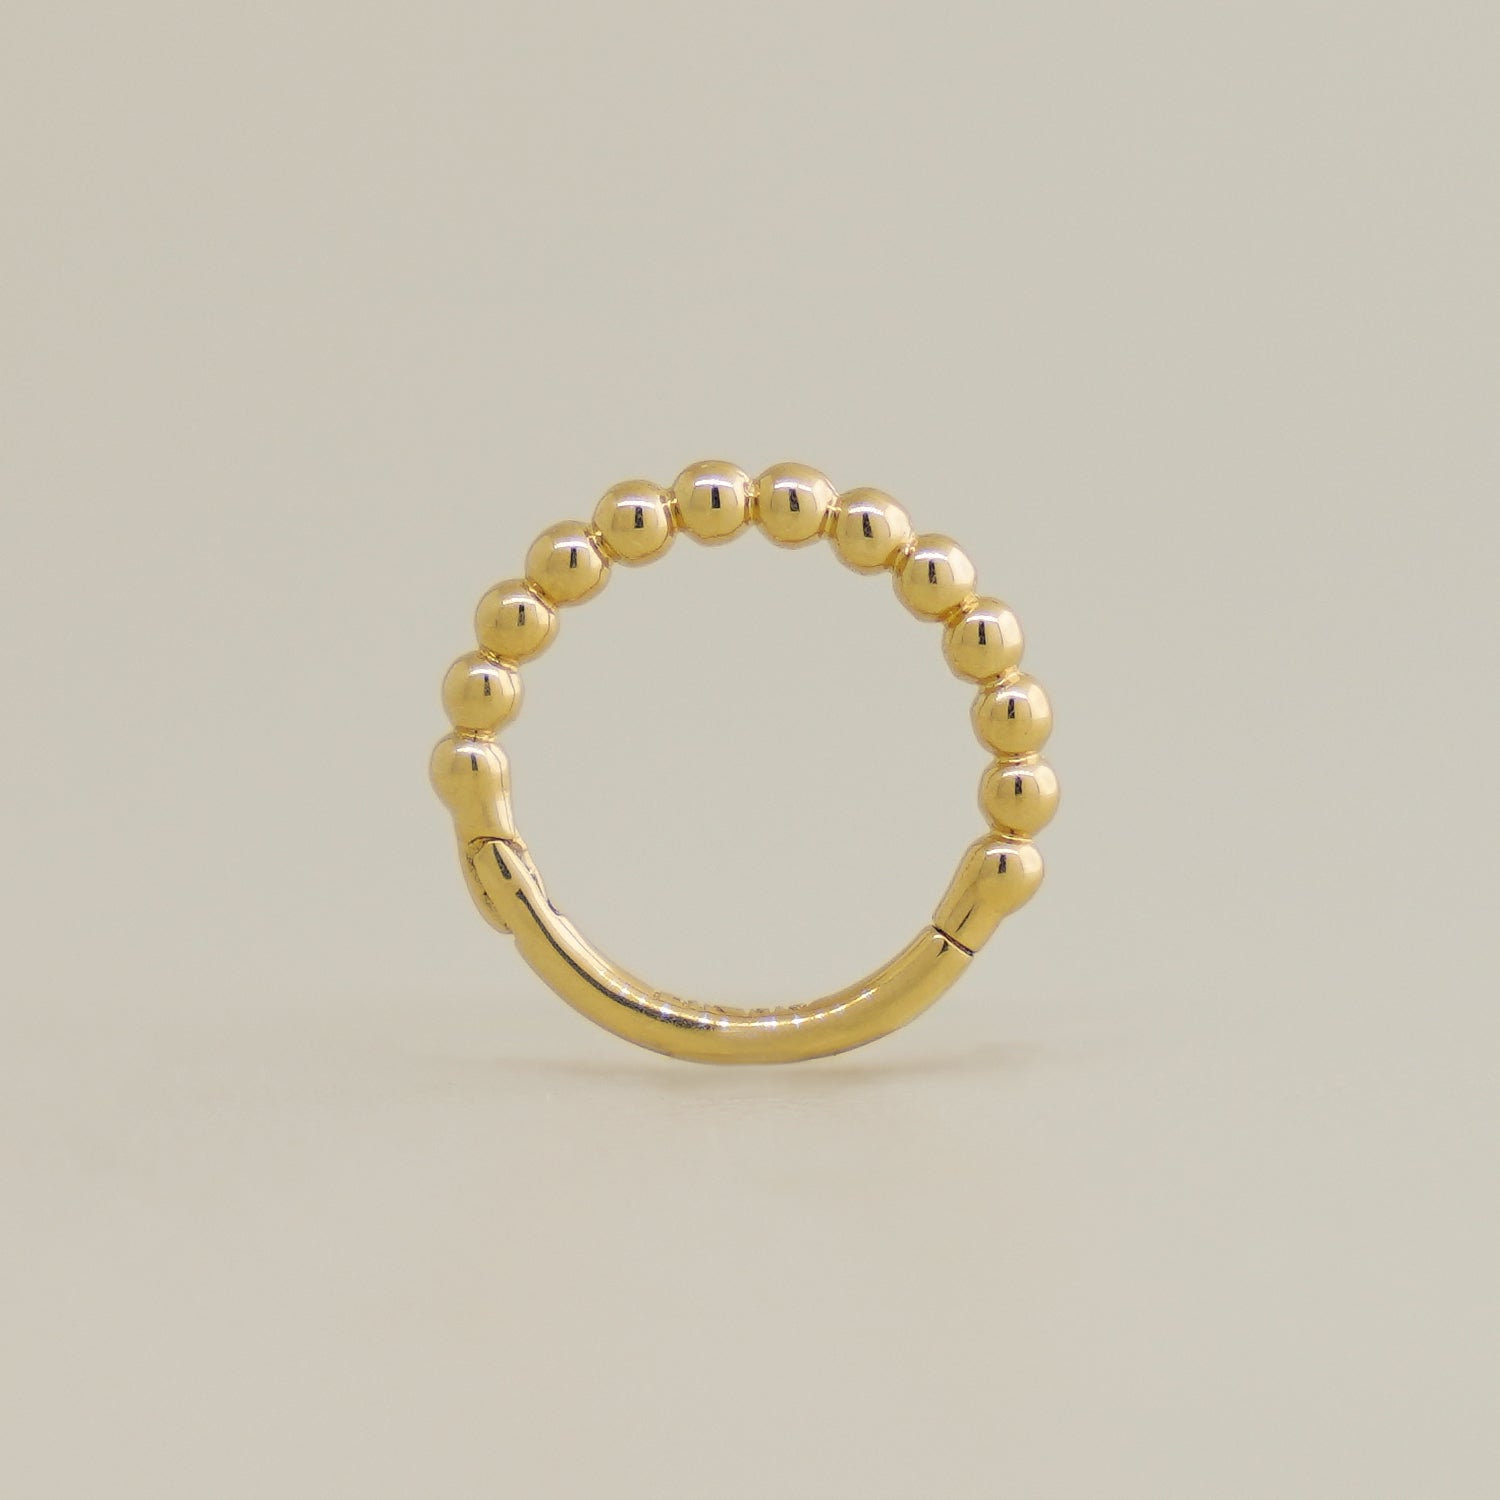 14K Solid Gold Beaded Ear & Nose Hoop Ring Piercing - anygolds